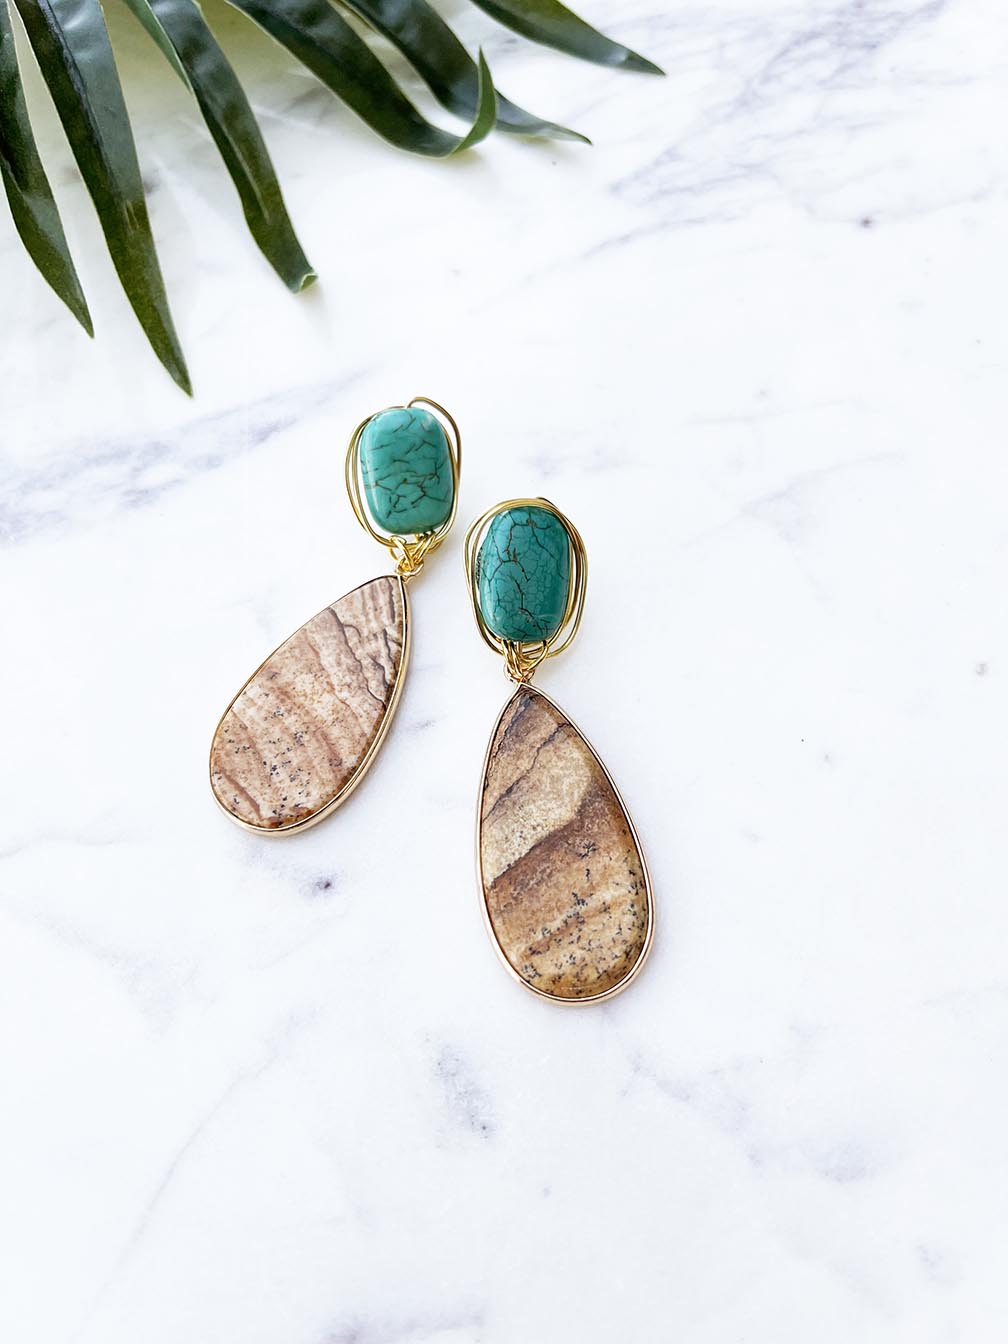 gala earrings - picture jasper and turquoise howlite